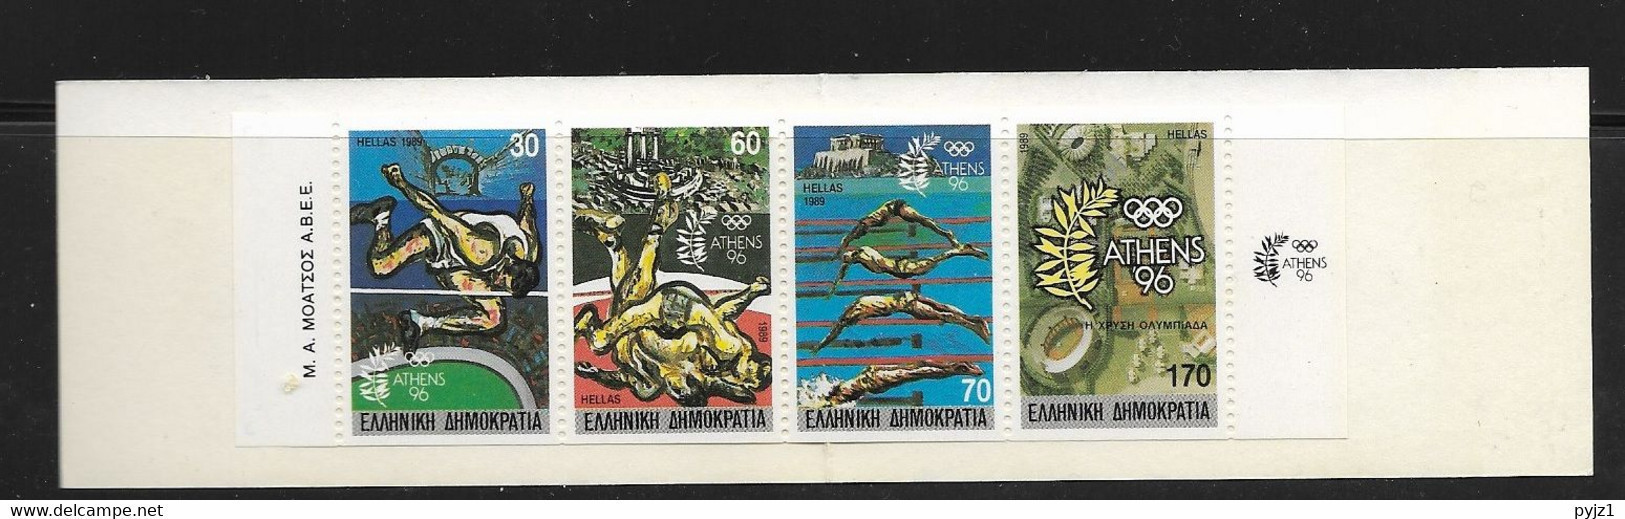 1989 MNH  Greece, Booklet Olympic Games  MH11 - Libretti